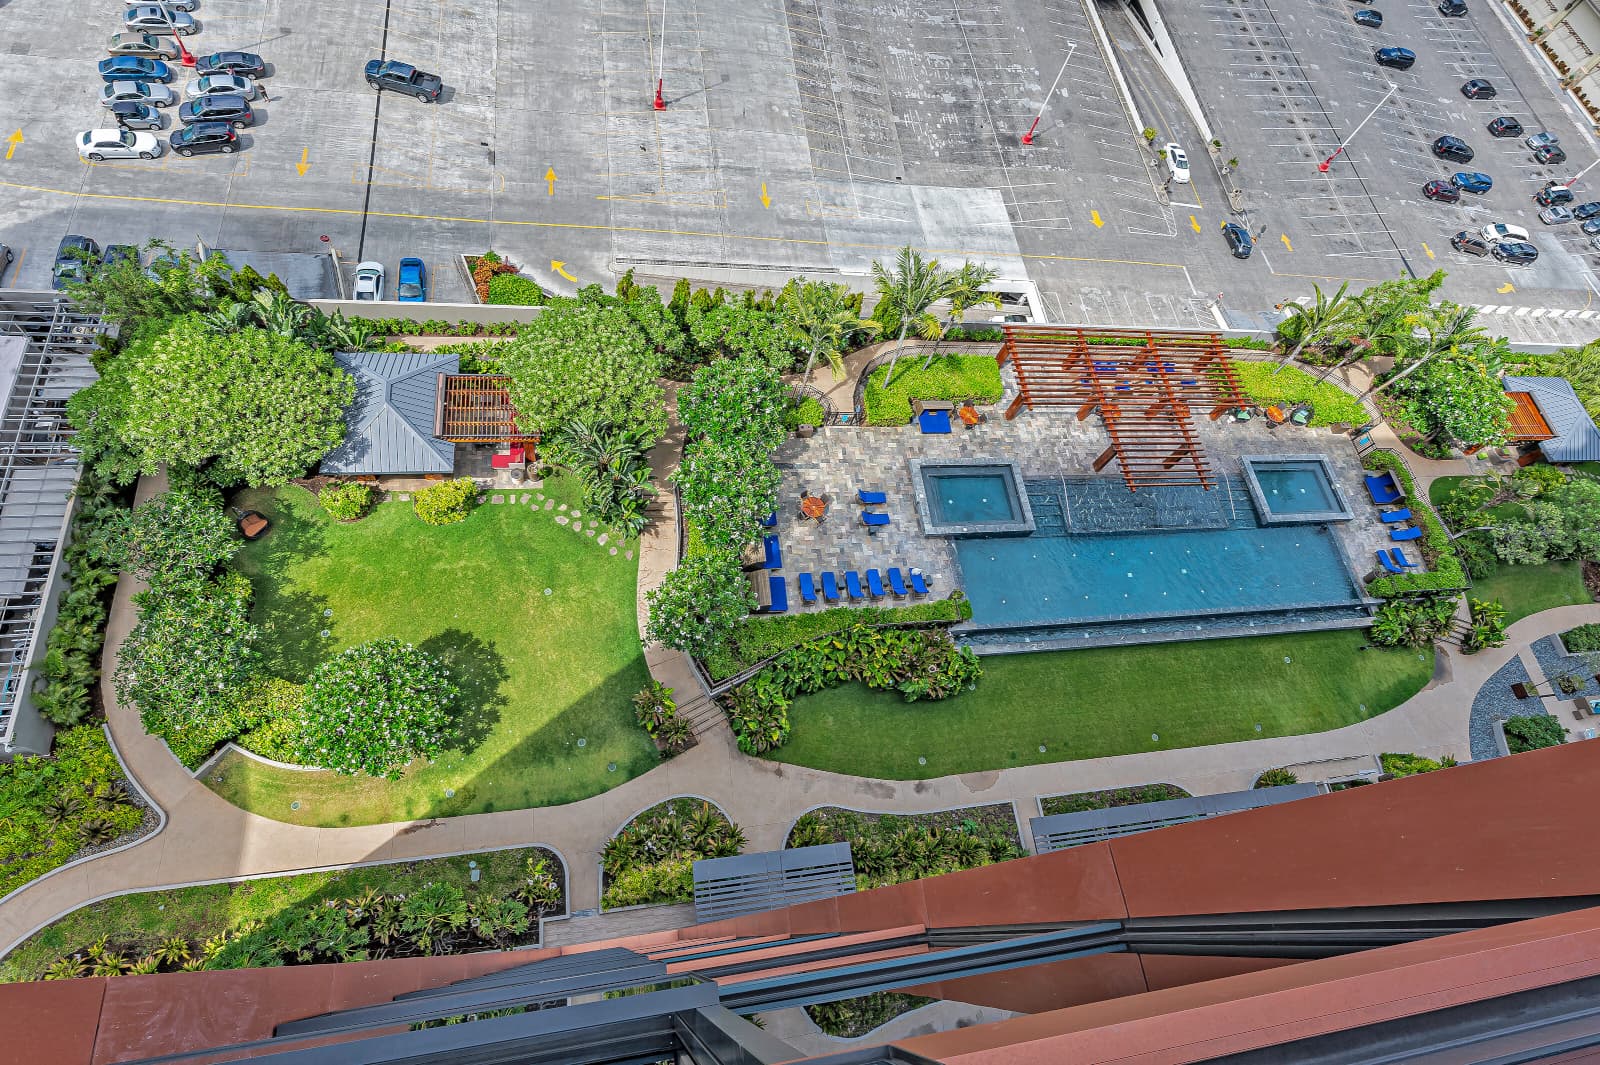 Overhead shot of One Ala Moana Amenity deck and nearby parking